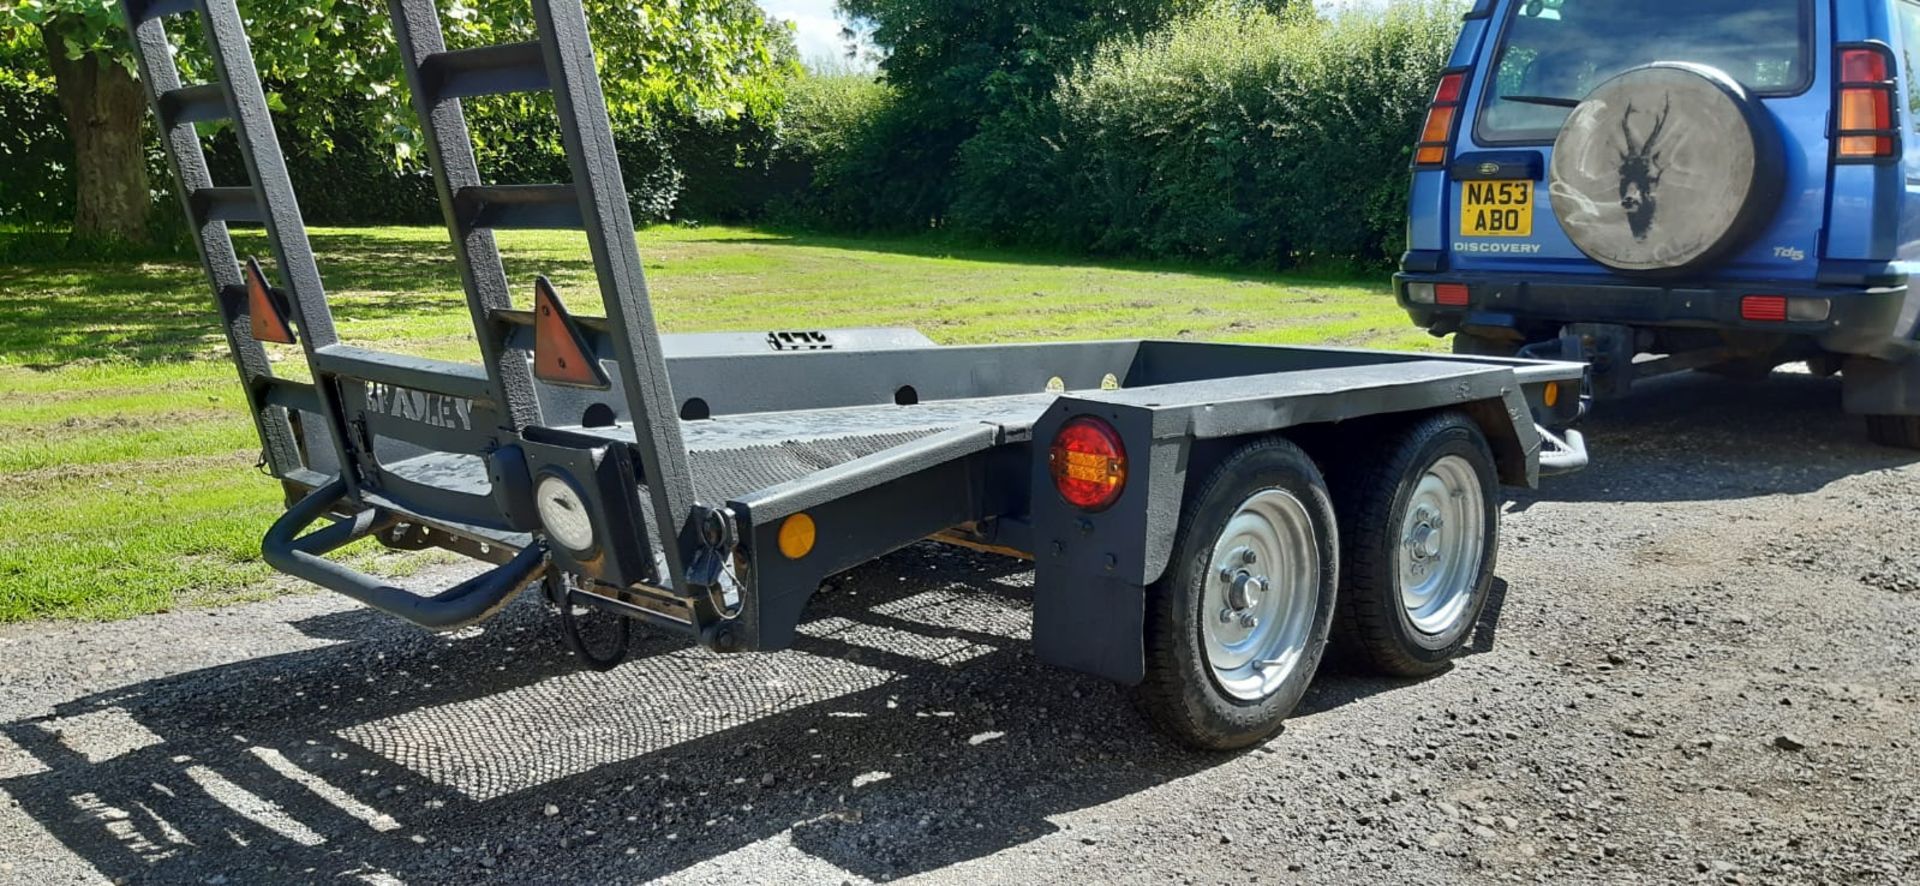 BRADLEY TWIN AXLE TOW-ABLE PLANT TRAILER WITH RAMP, MODEL S2600PT, YEAR 2010, 2600 KG GROSS *NO VAT* - Image 5 of 12